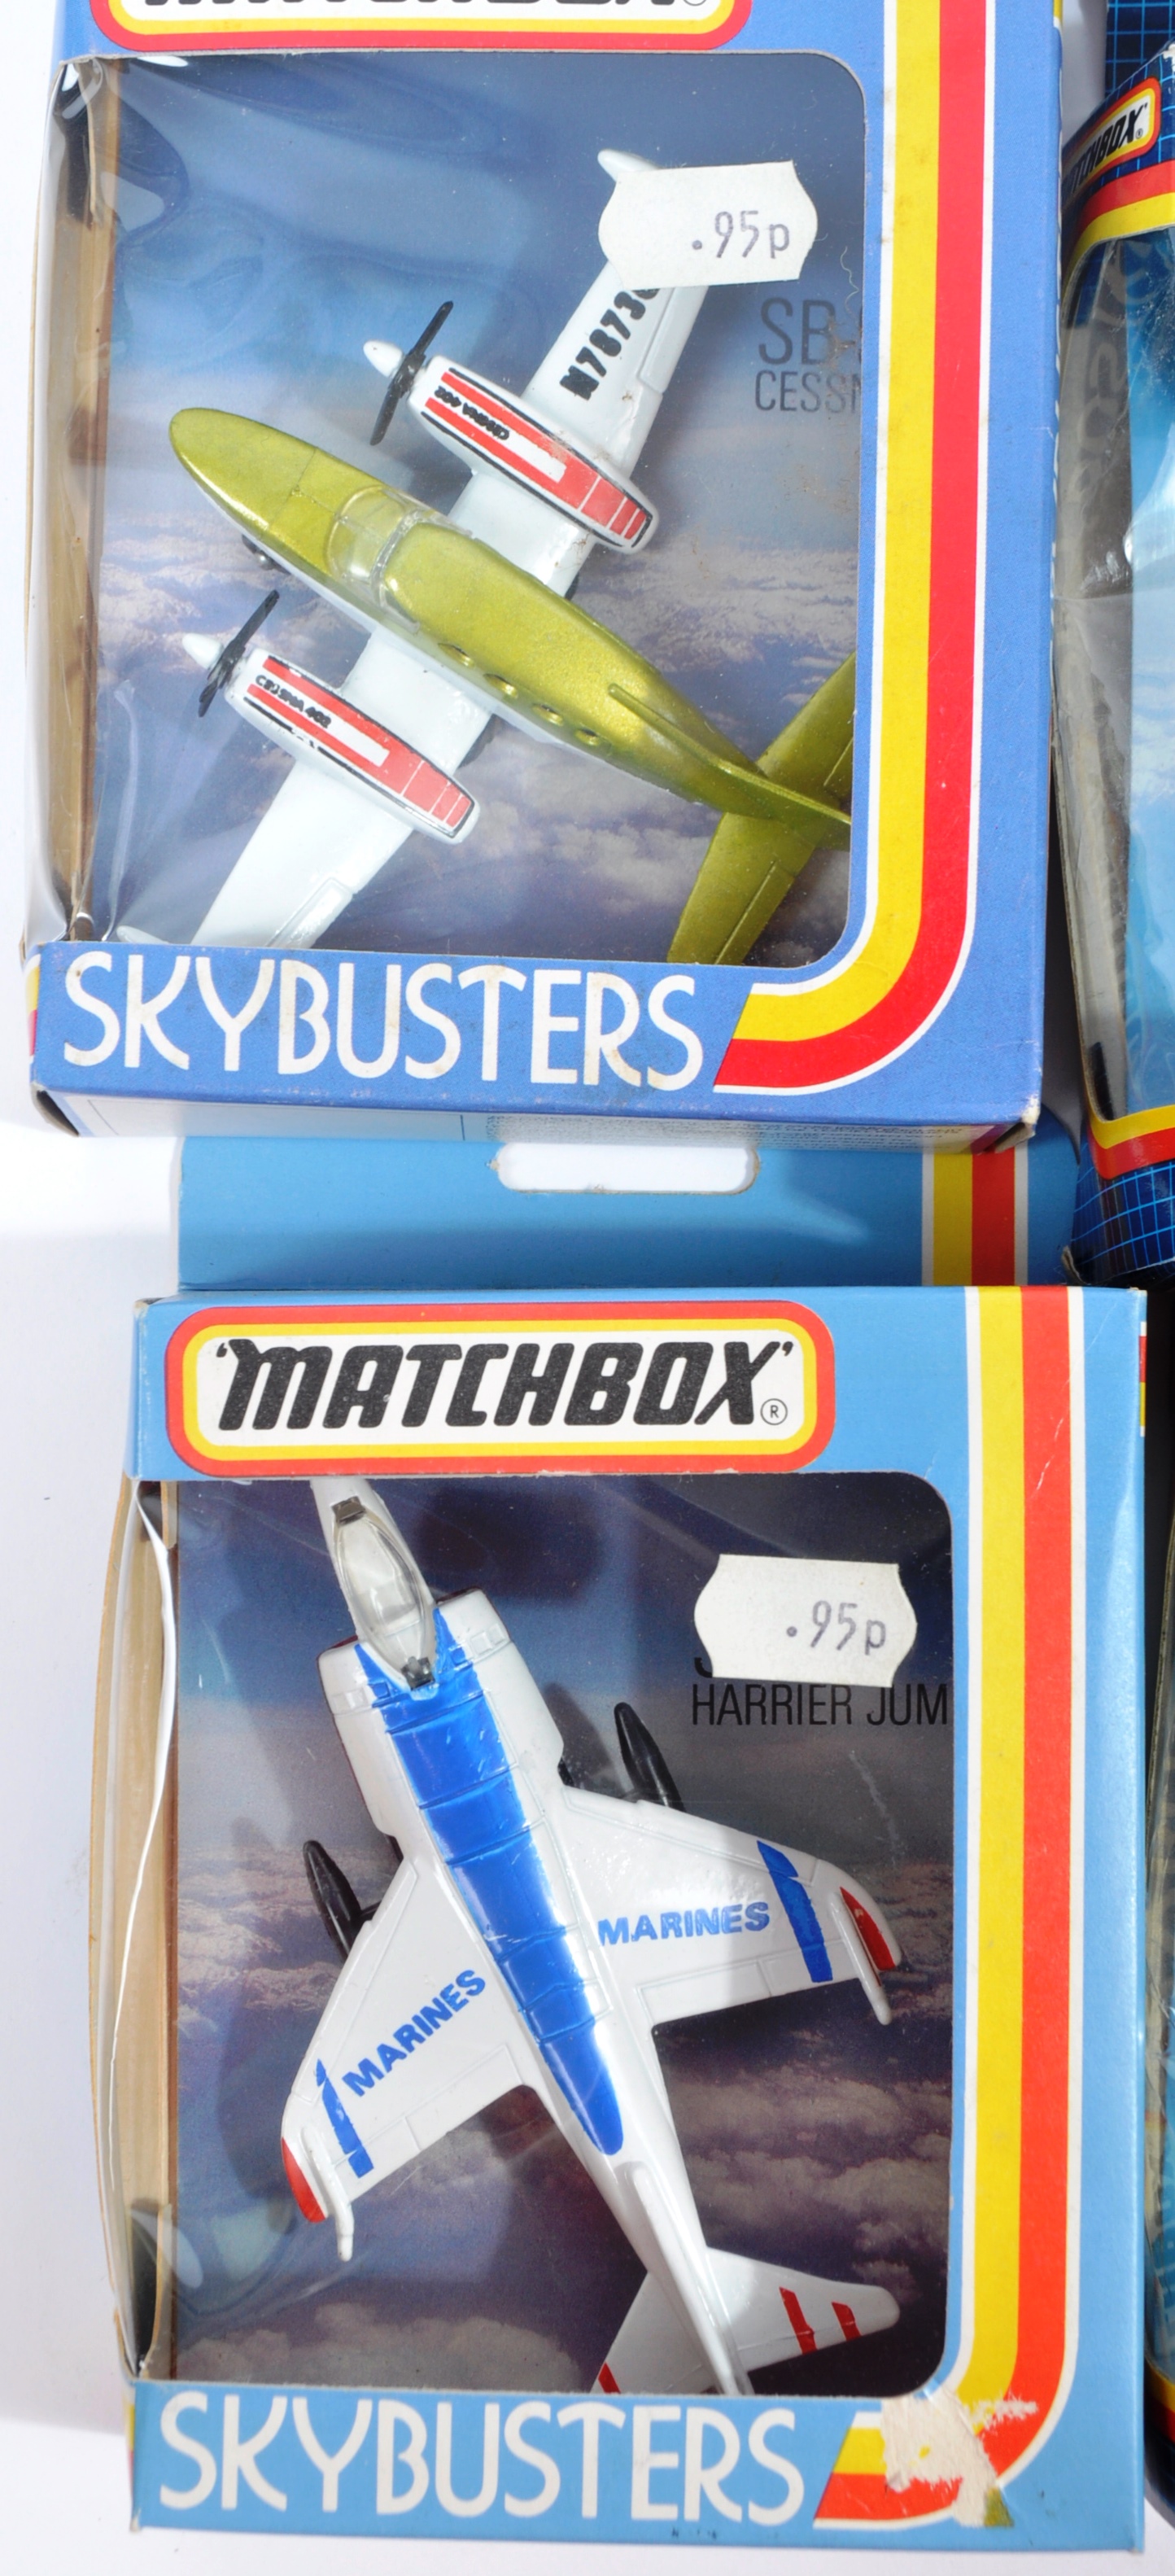 COLLECTION OF X15 MATCHBOX SKYBUSTERS DIECAST MODEL AEROPLANES - Image 6 of 7